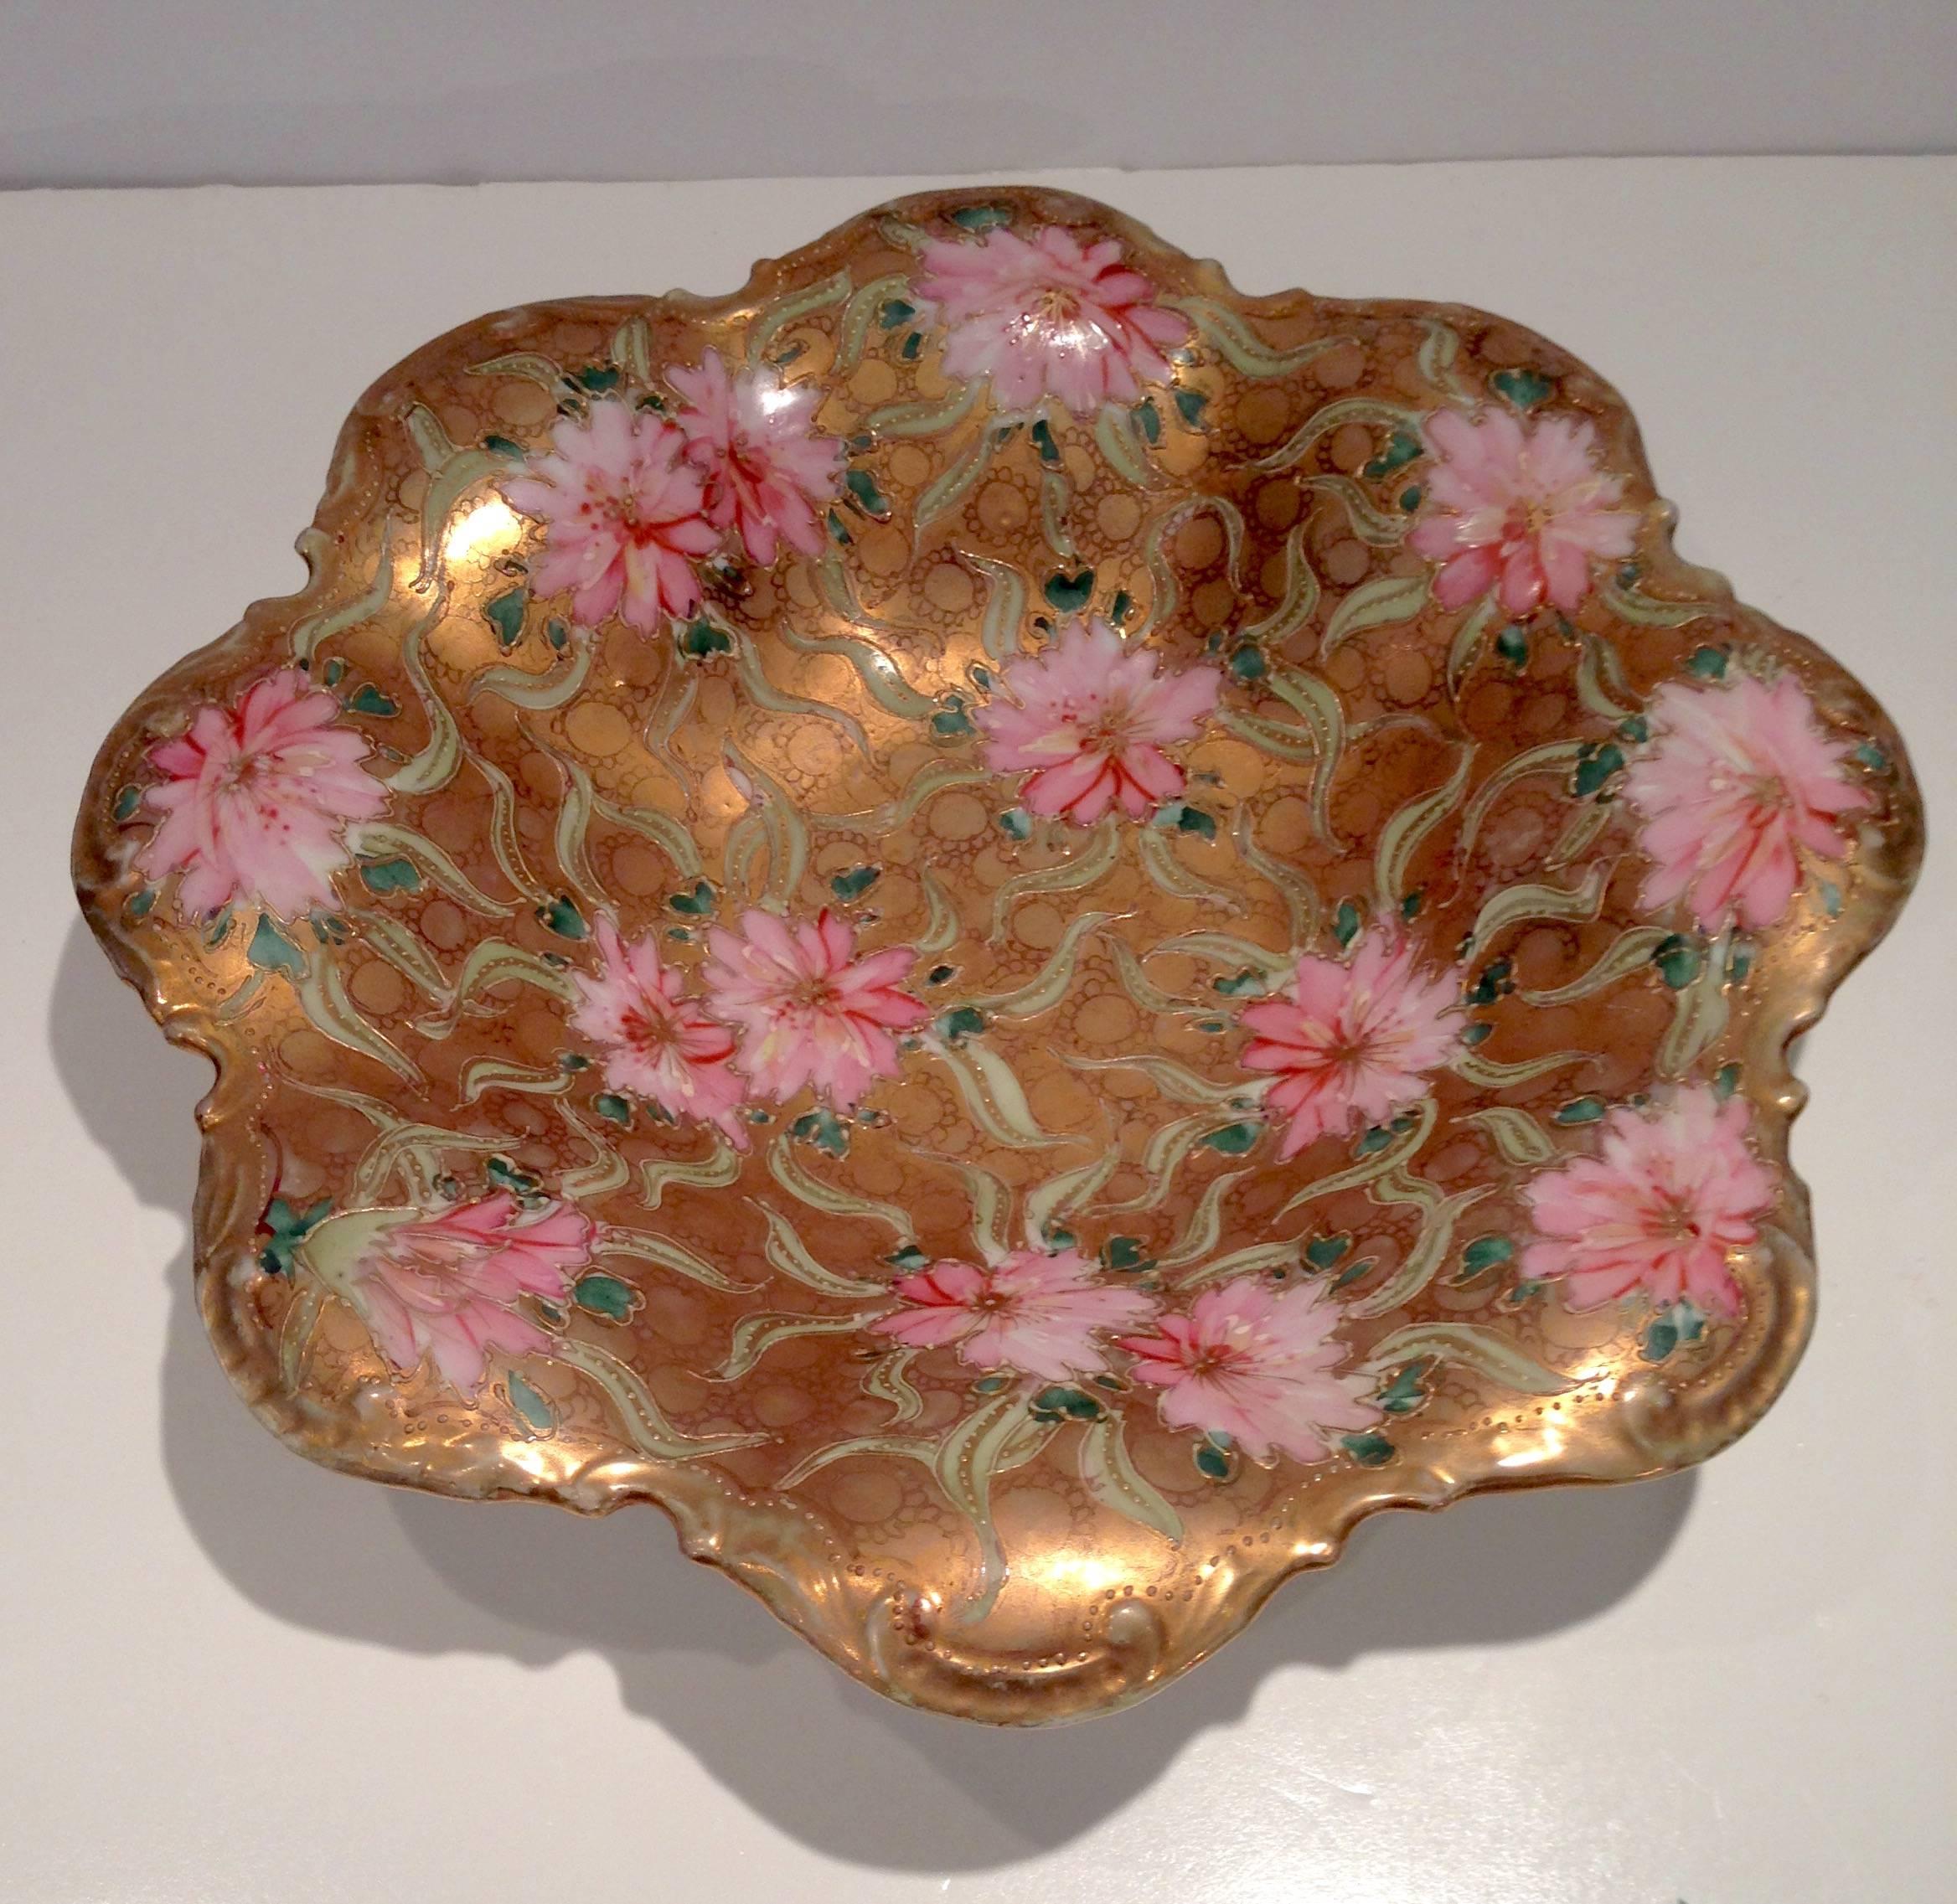 19th century Japanese porcelain hand-painted Moriage gold gilt floral ruffle bowl by, Royal Nippon. This extremely rare and hand-painted bowl features a gold gilt ground, raised moriage style detail, gorgeous green, pink and white floral vine motif.